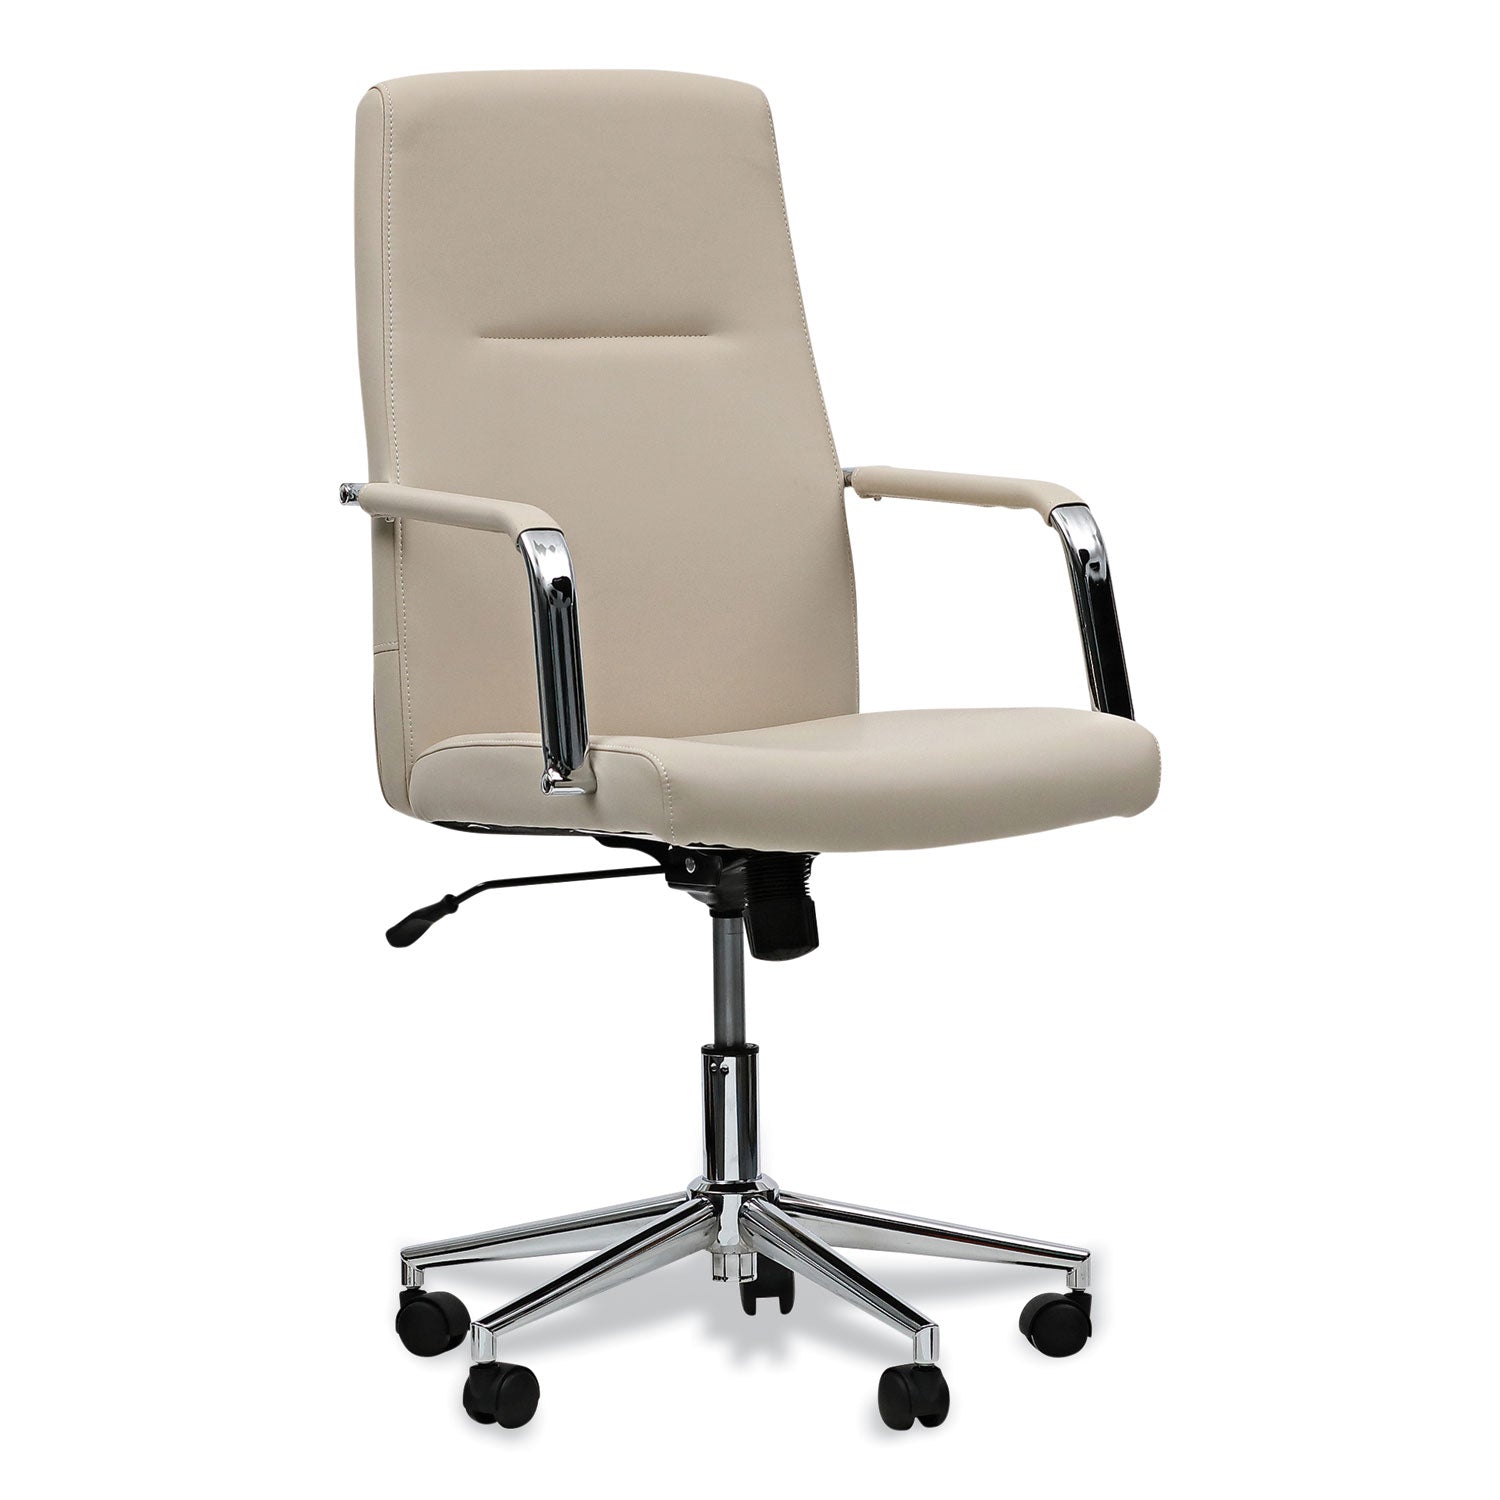 leather-task-chair-supports-up-to-275-lb-1819-to-2193-seat-height-white-seat-white-back_alews4106 - 1